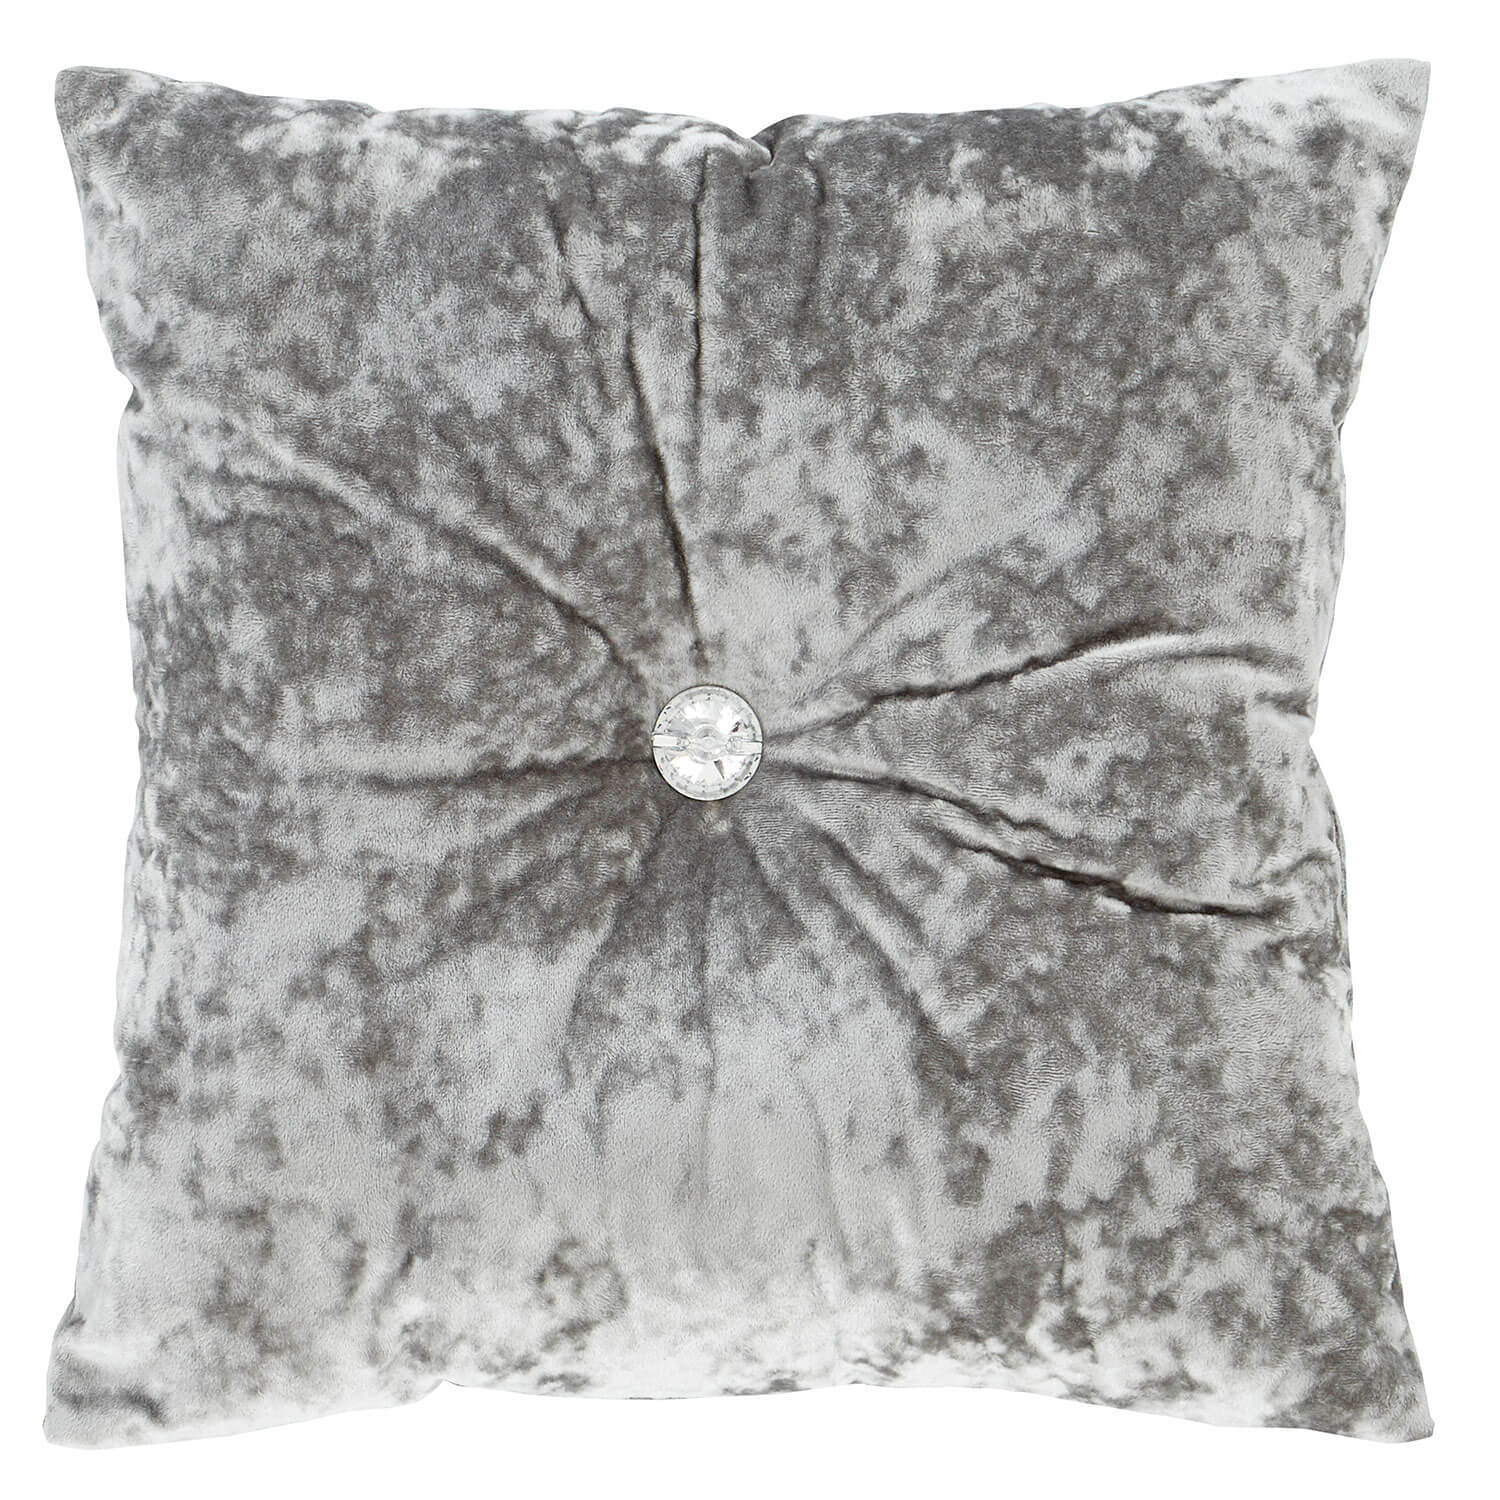 Catherine Lansfield Crushed Velvet Filled Cushion - Silver 1 Shaws Department Stores